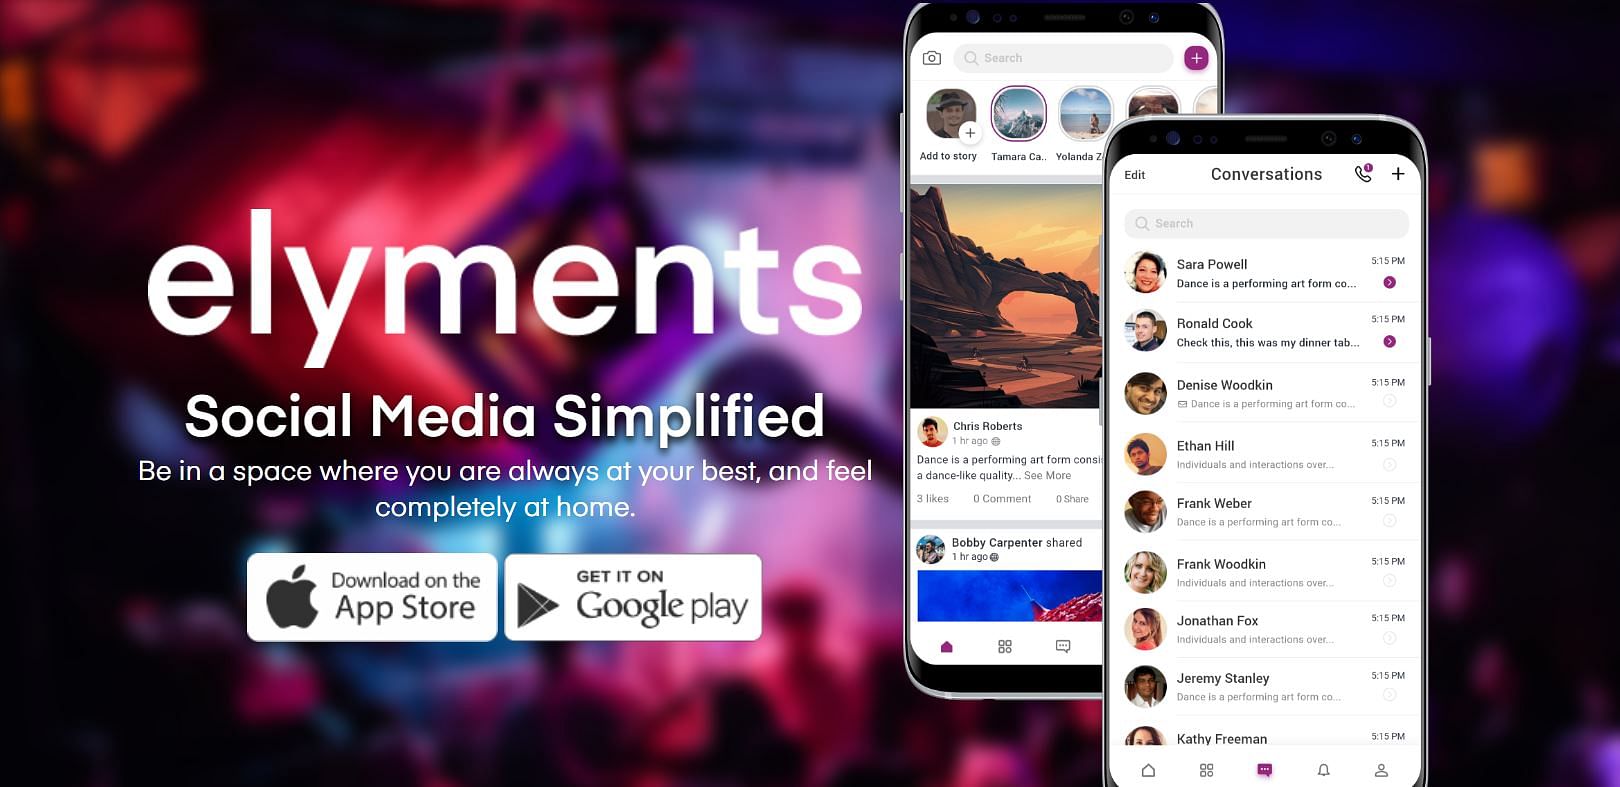 Elyments app is now available on both Google Play and Apple App Store. (Company's official website screen-grab)